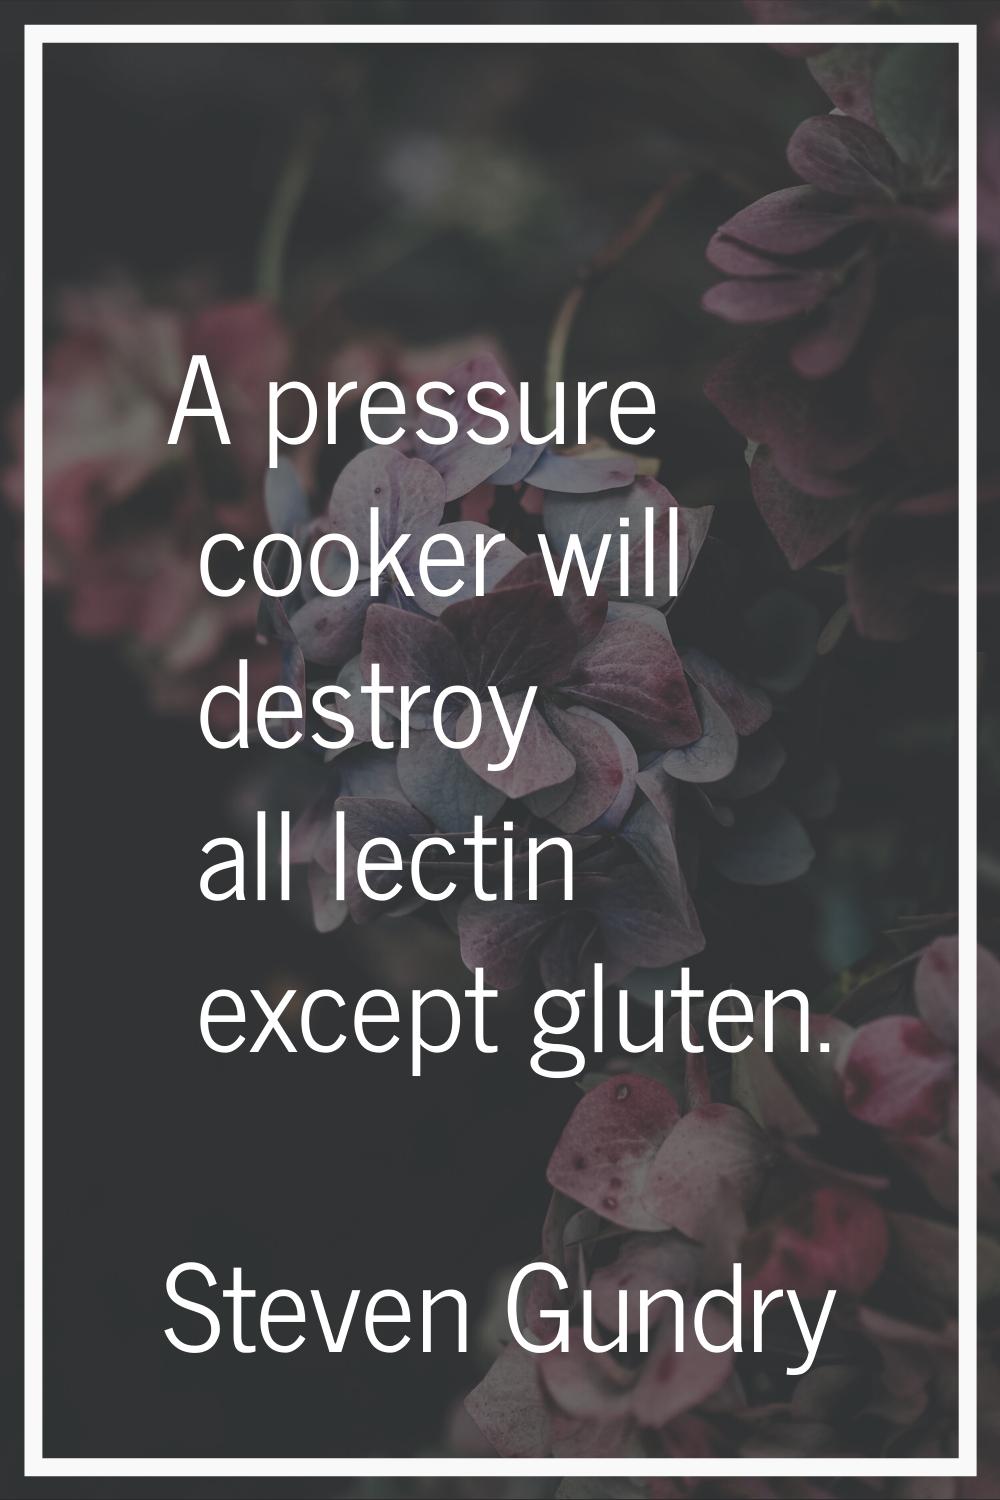 A pressure cooker will destroy all lectin except gluten.